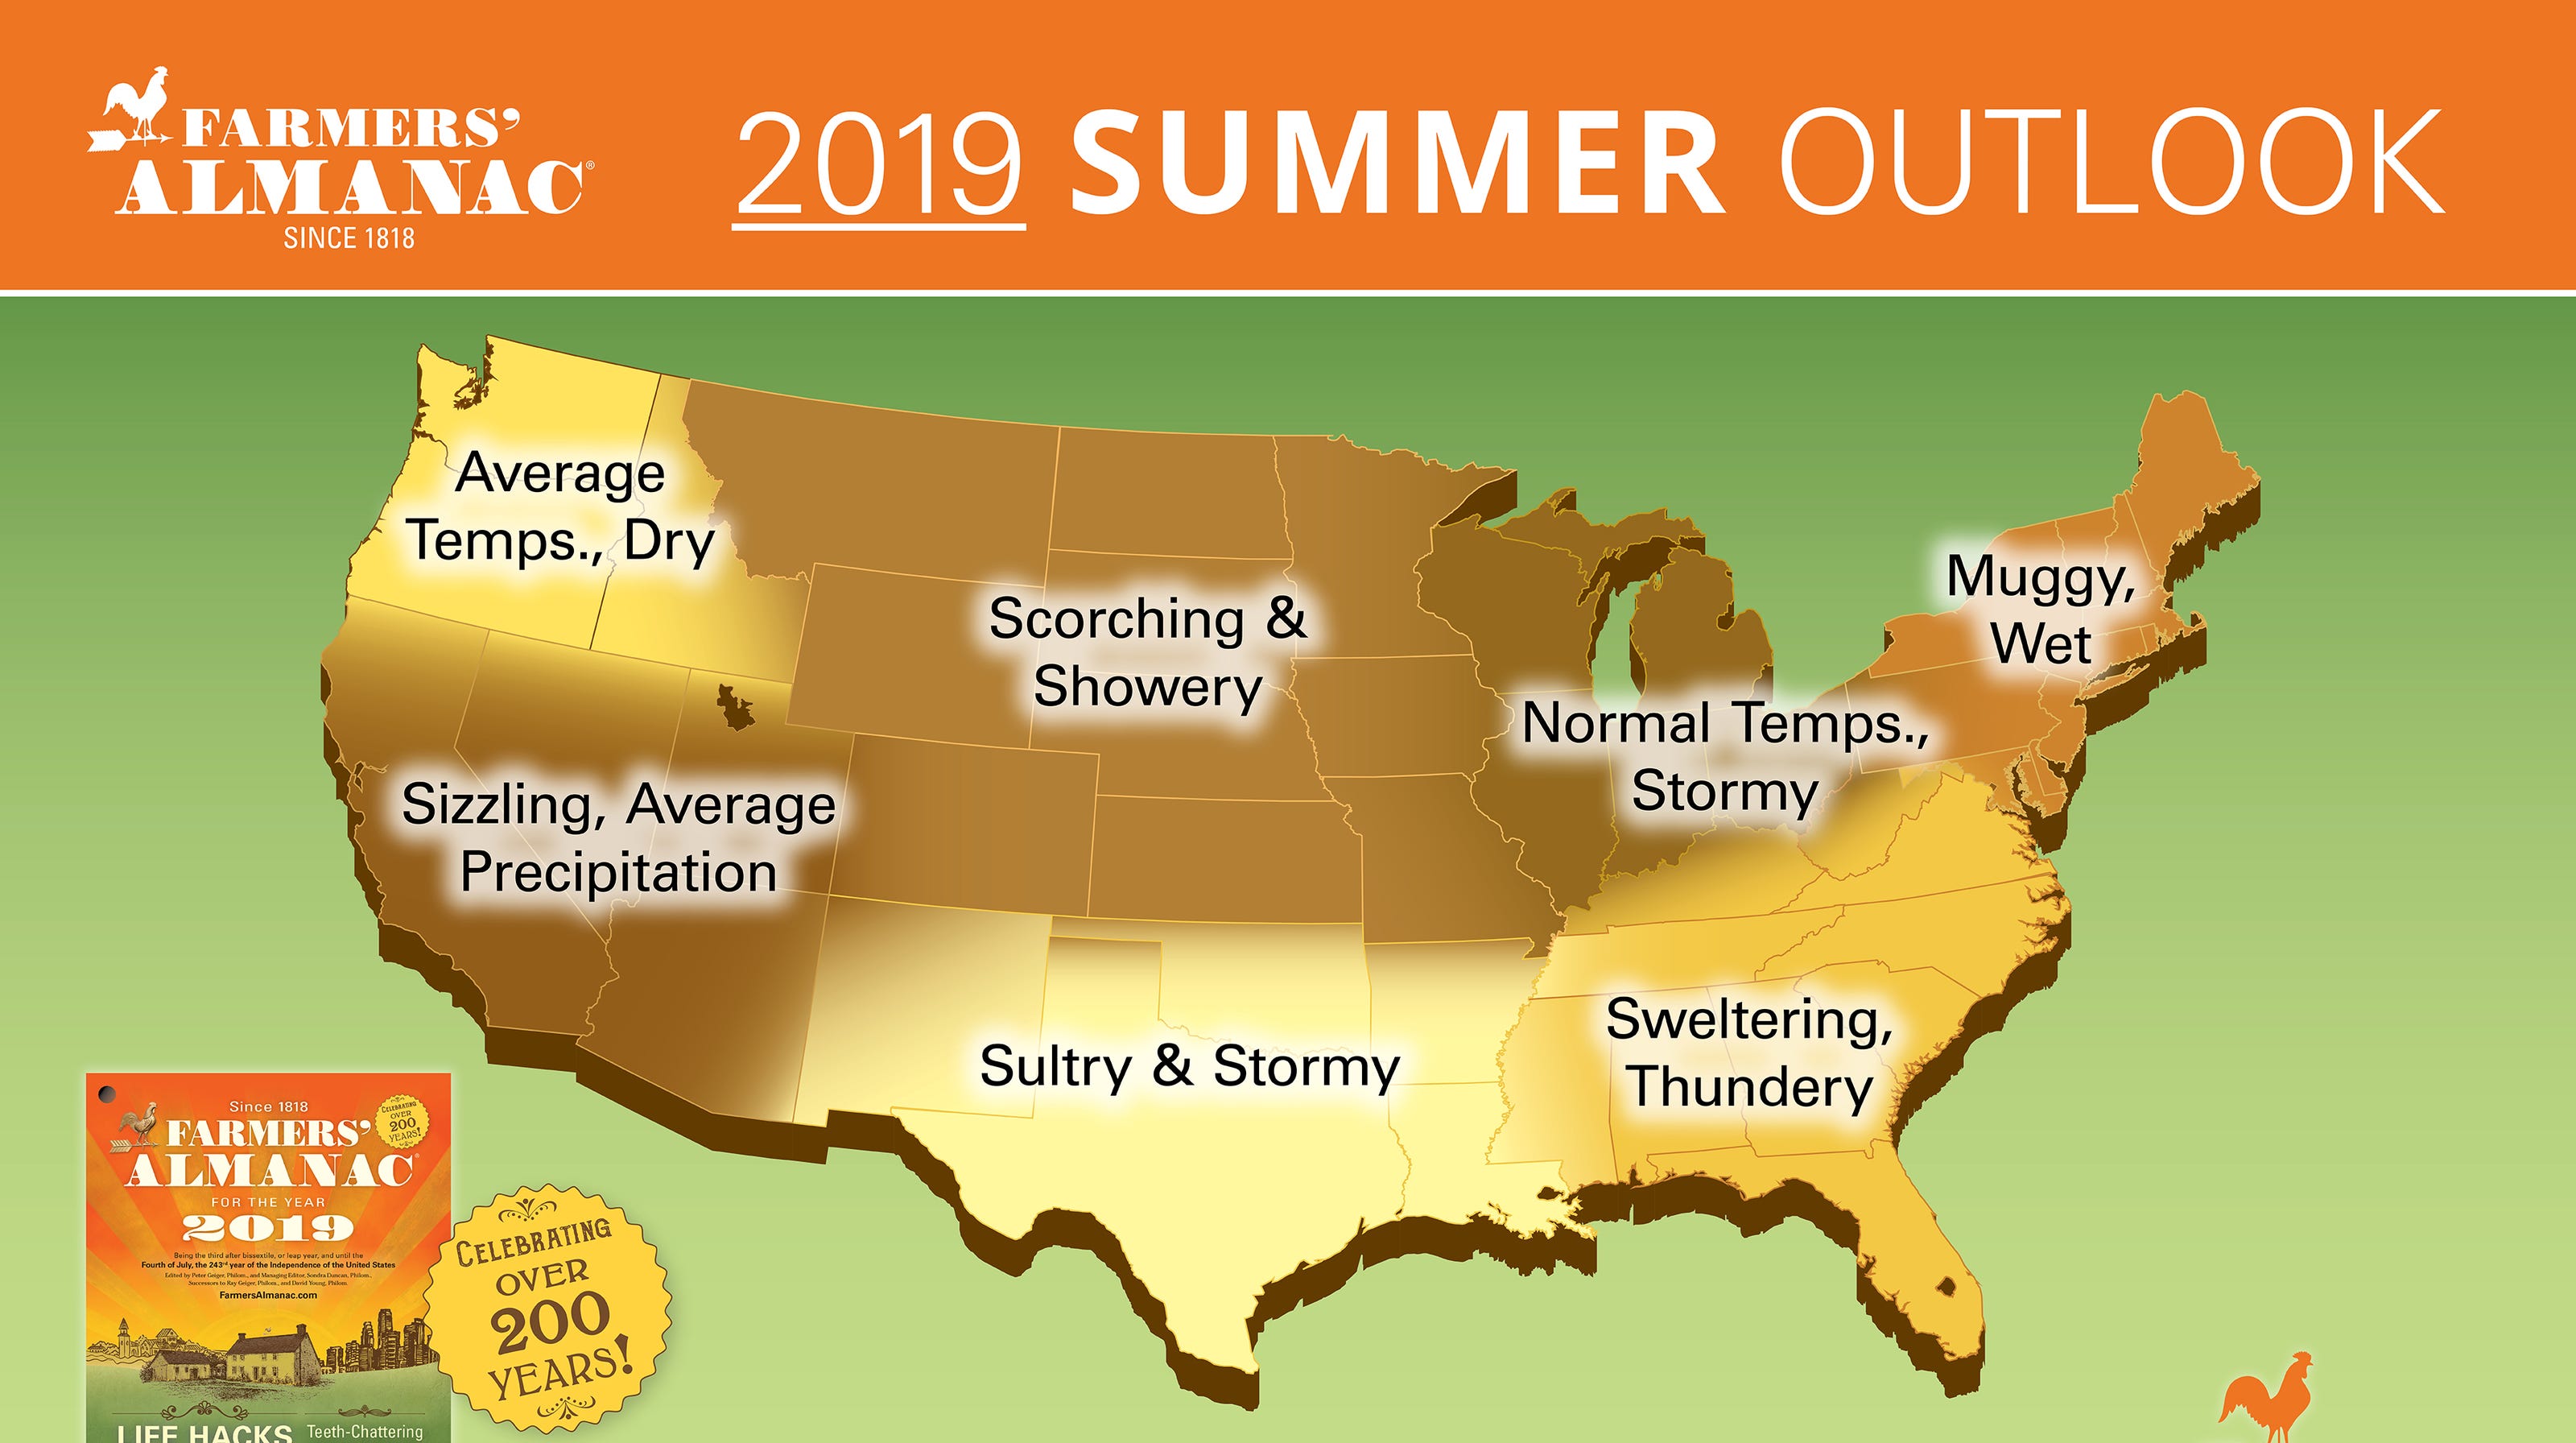 2019 summer outlook It's going to be muggy, wet for the Northeast